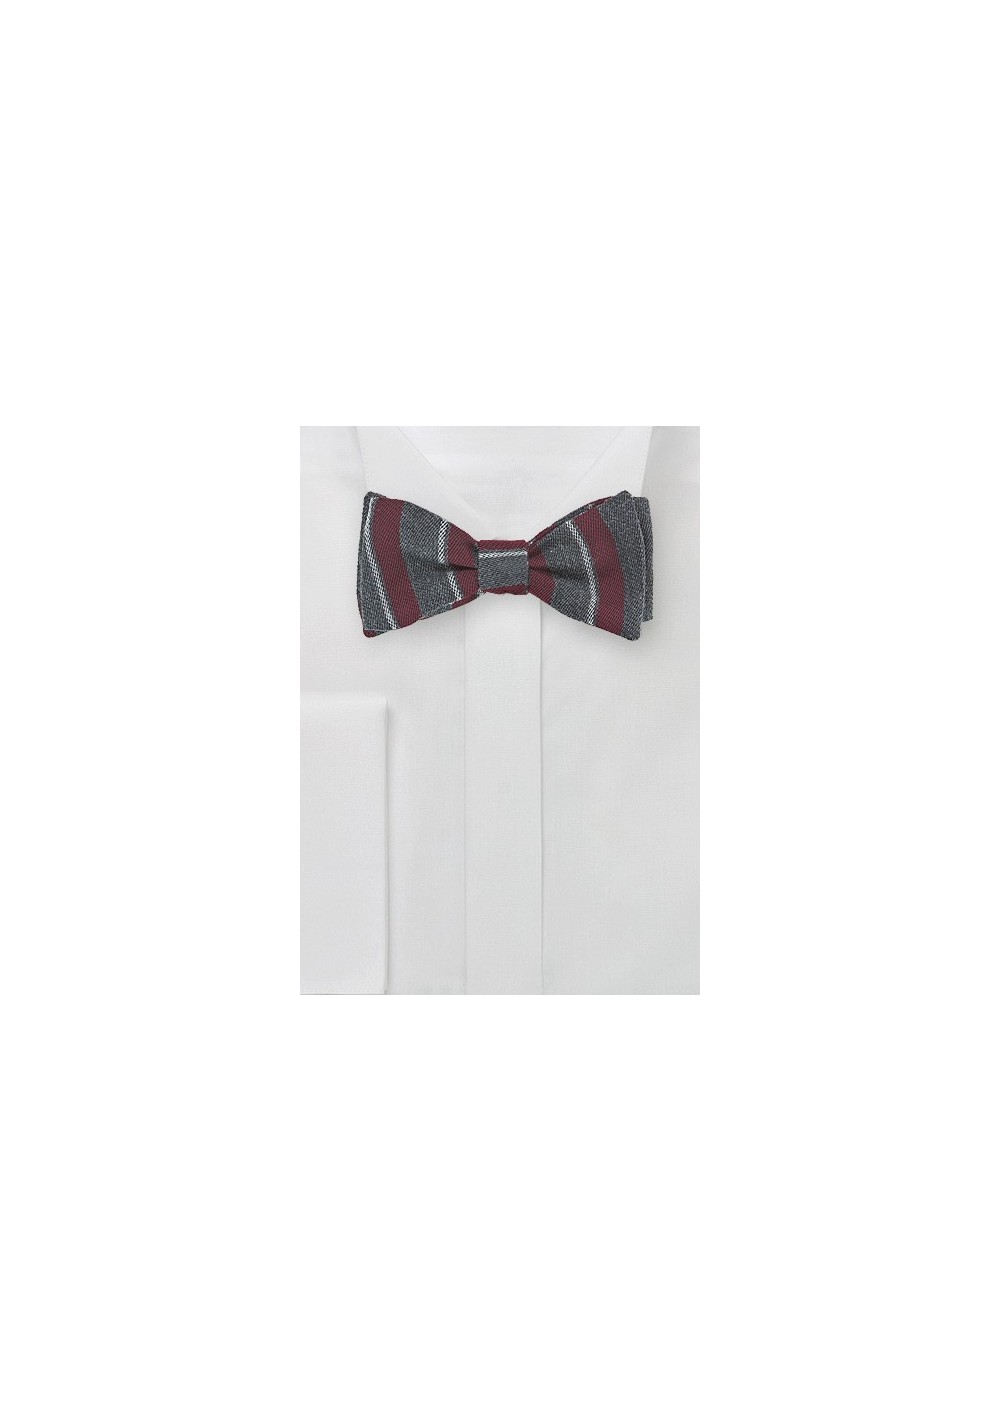 Wool Striped Bow Tie in Gray and Burgundy